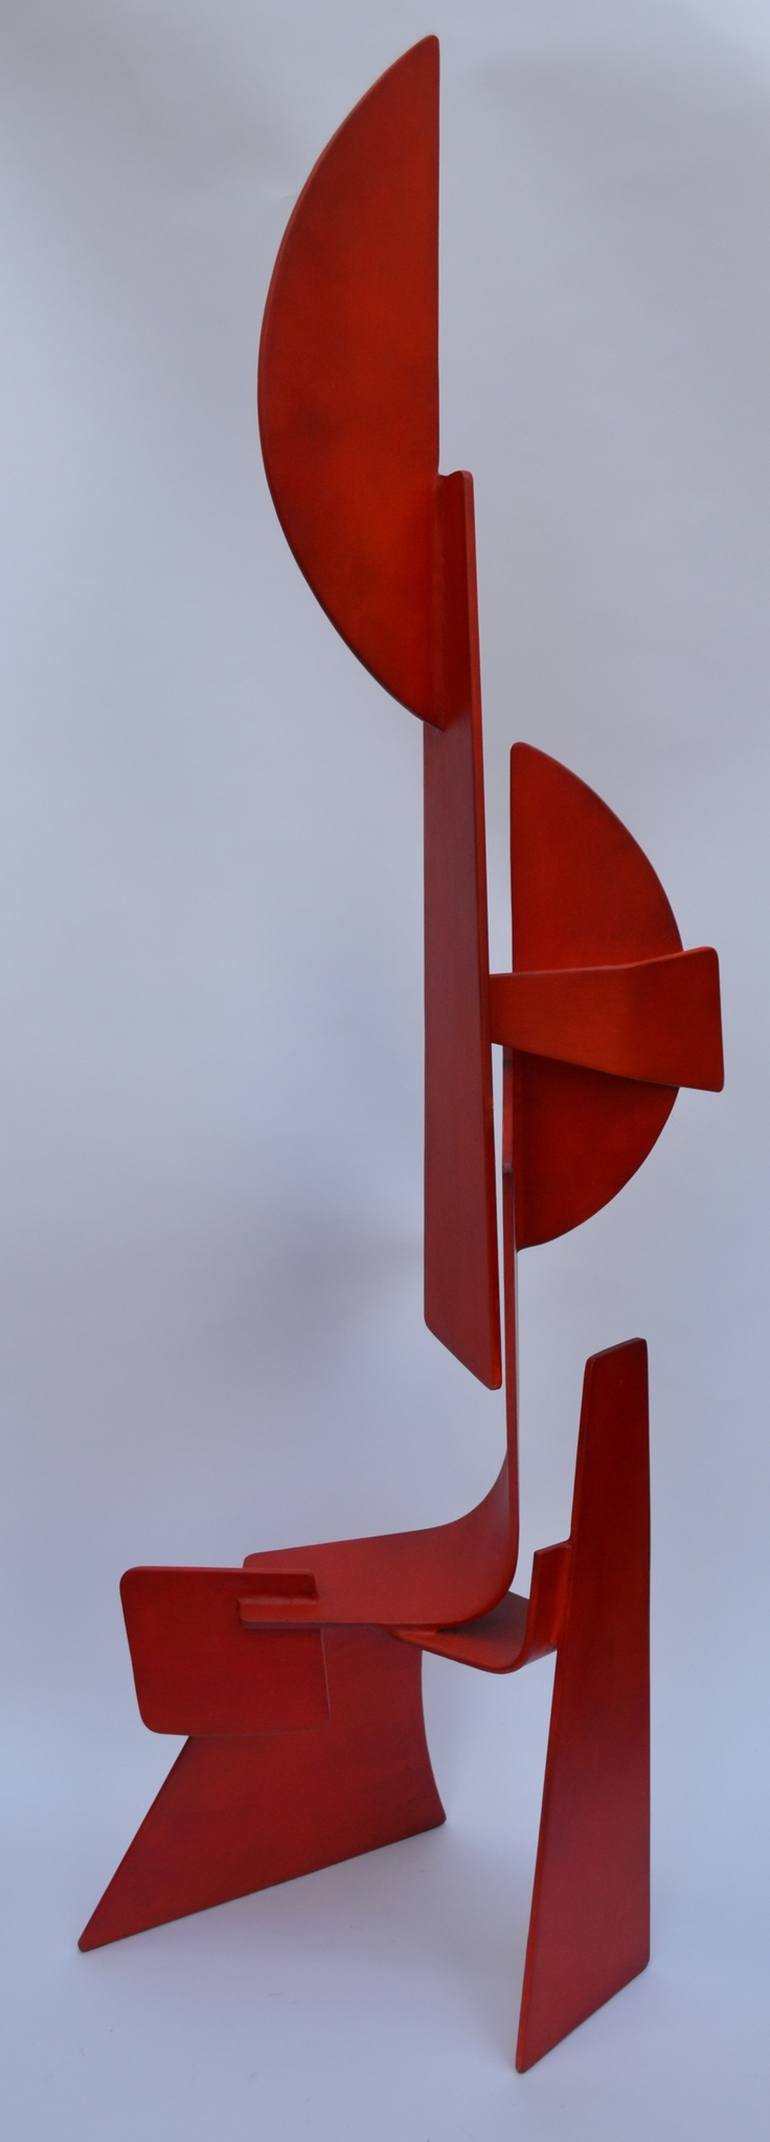 Original Documentary Abstract Sculpture by Nick Moran